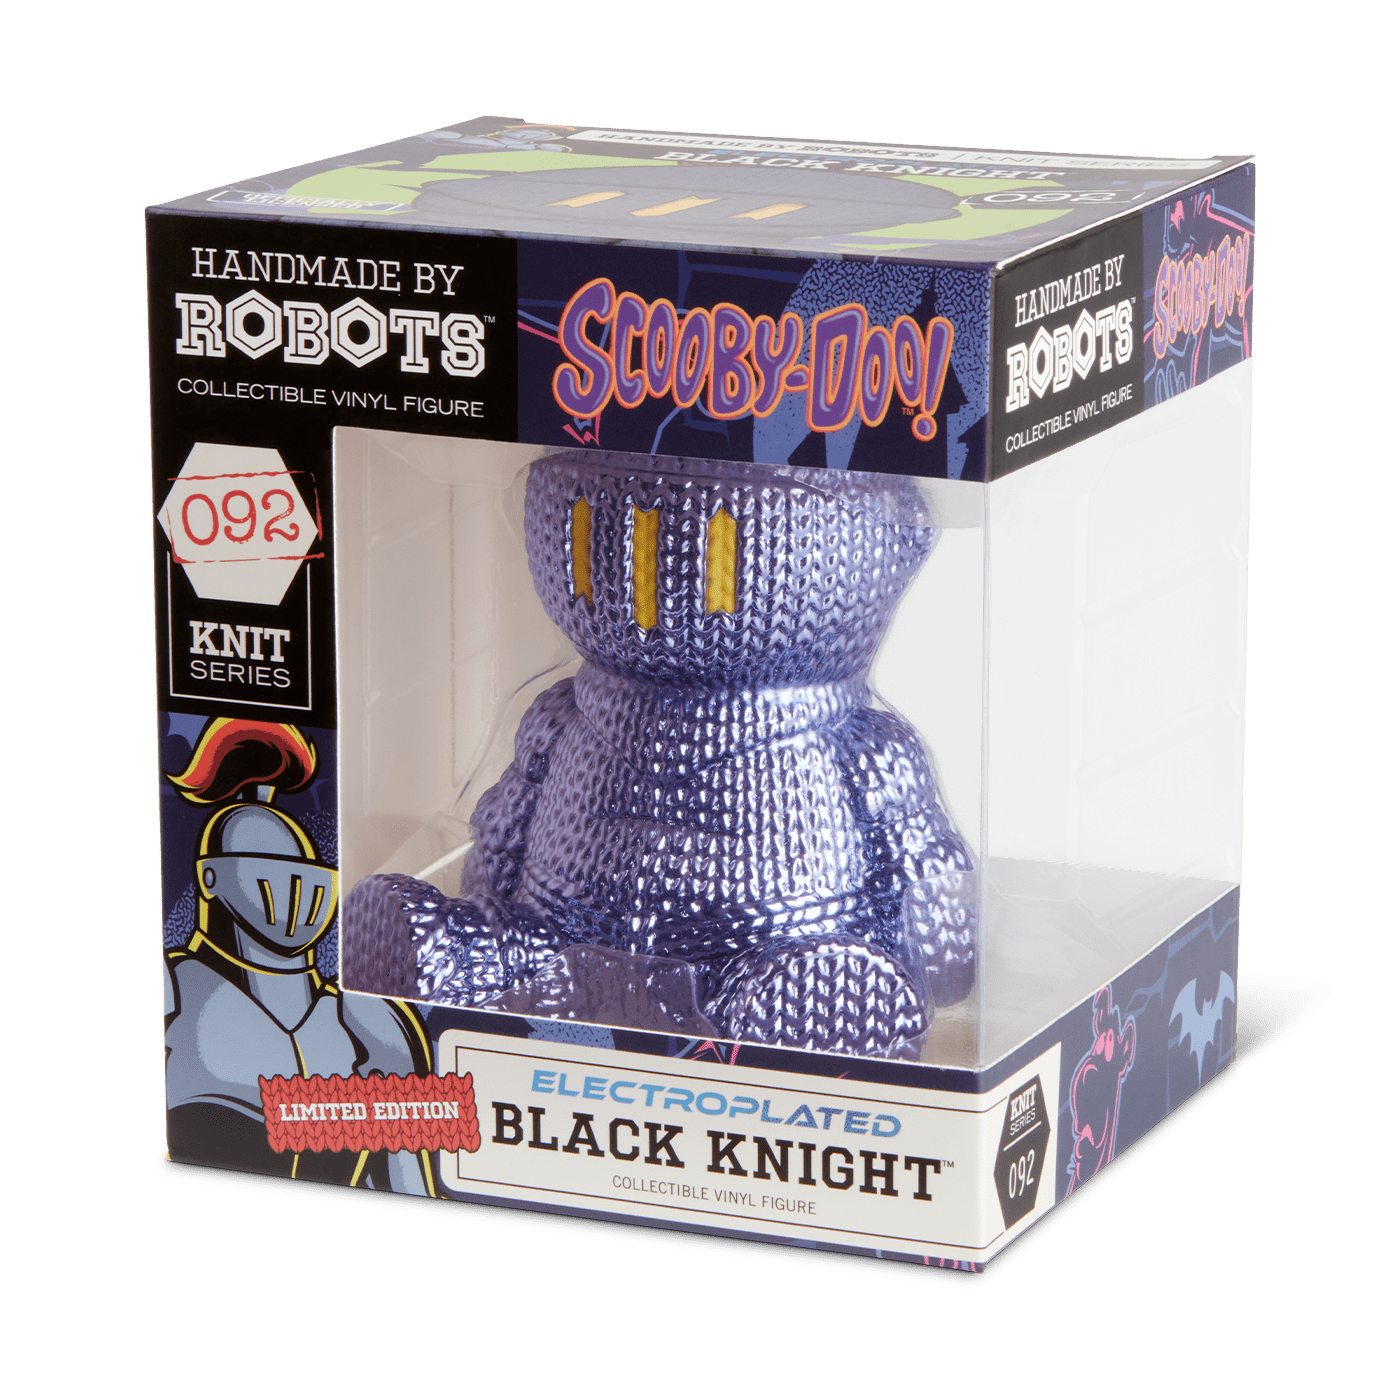 Black Knight #092 - Scooby-Doo - Handmade by Robots - Limited Edition